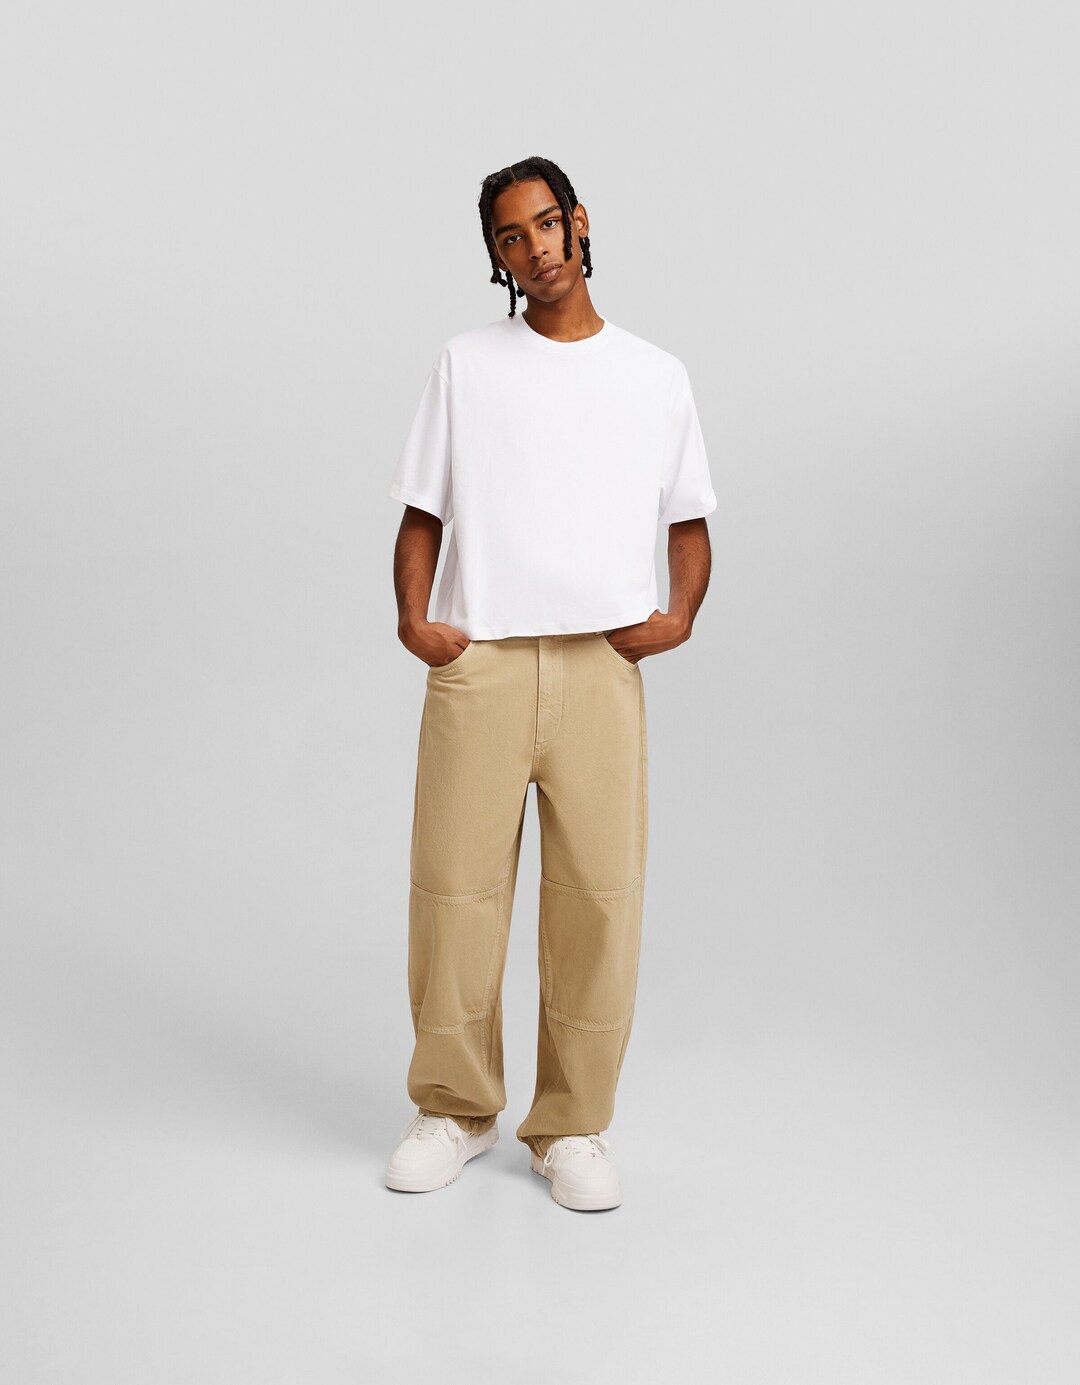 Men’s Trousers | New Collection | BERSHKA